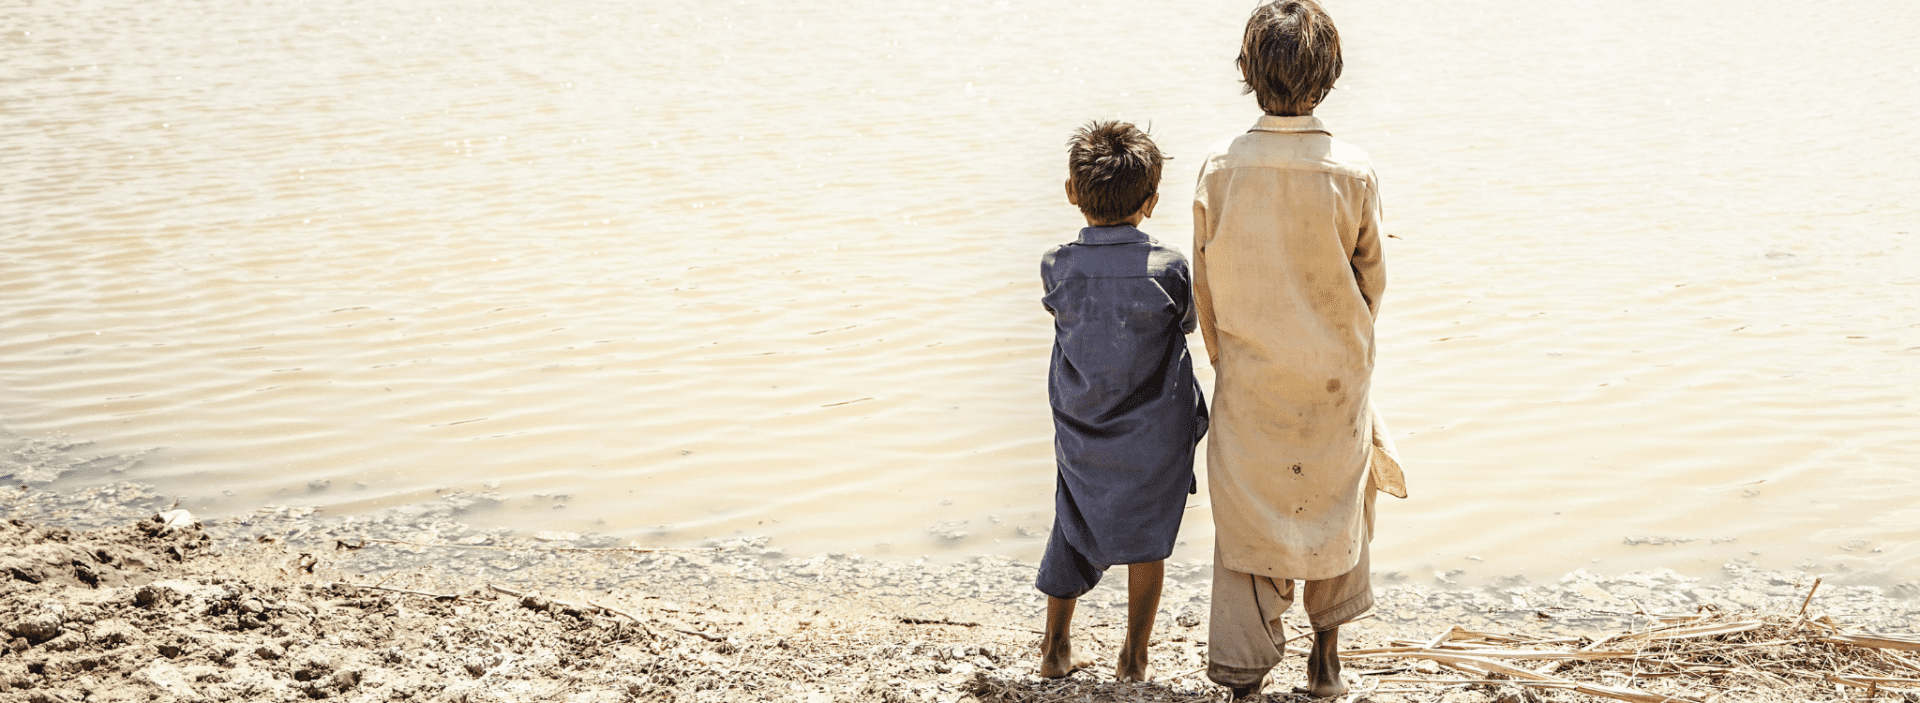 Two boys looks out onto the destruction caused by floods in Pakistan.